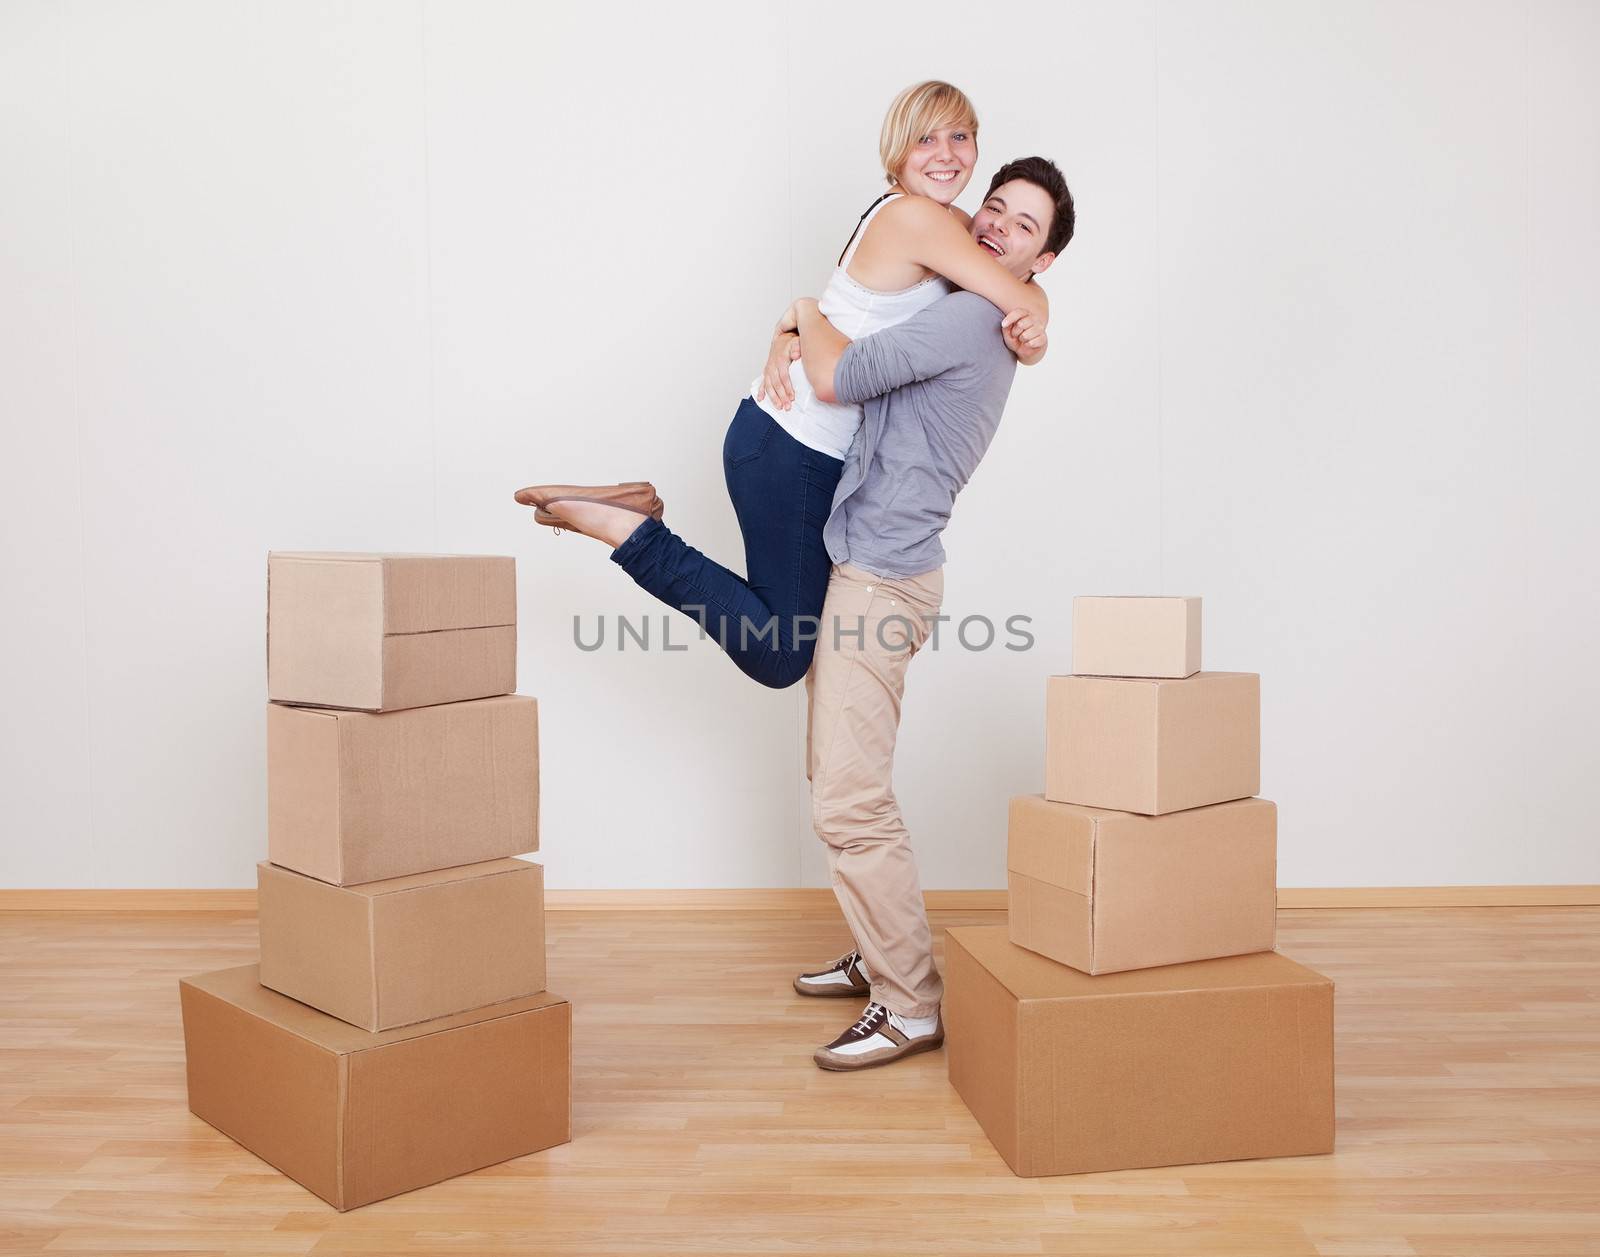 Happy young couple in a close ecstatic embrace smiling happily as they stand surrounded by cartons in their new home